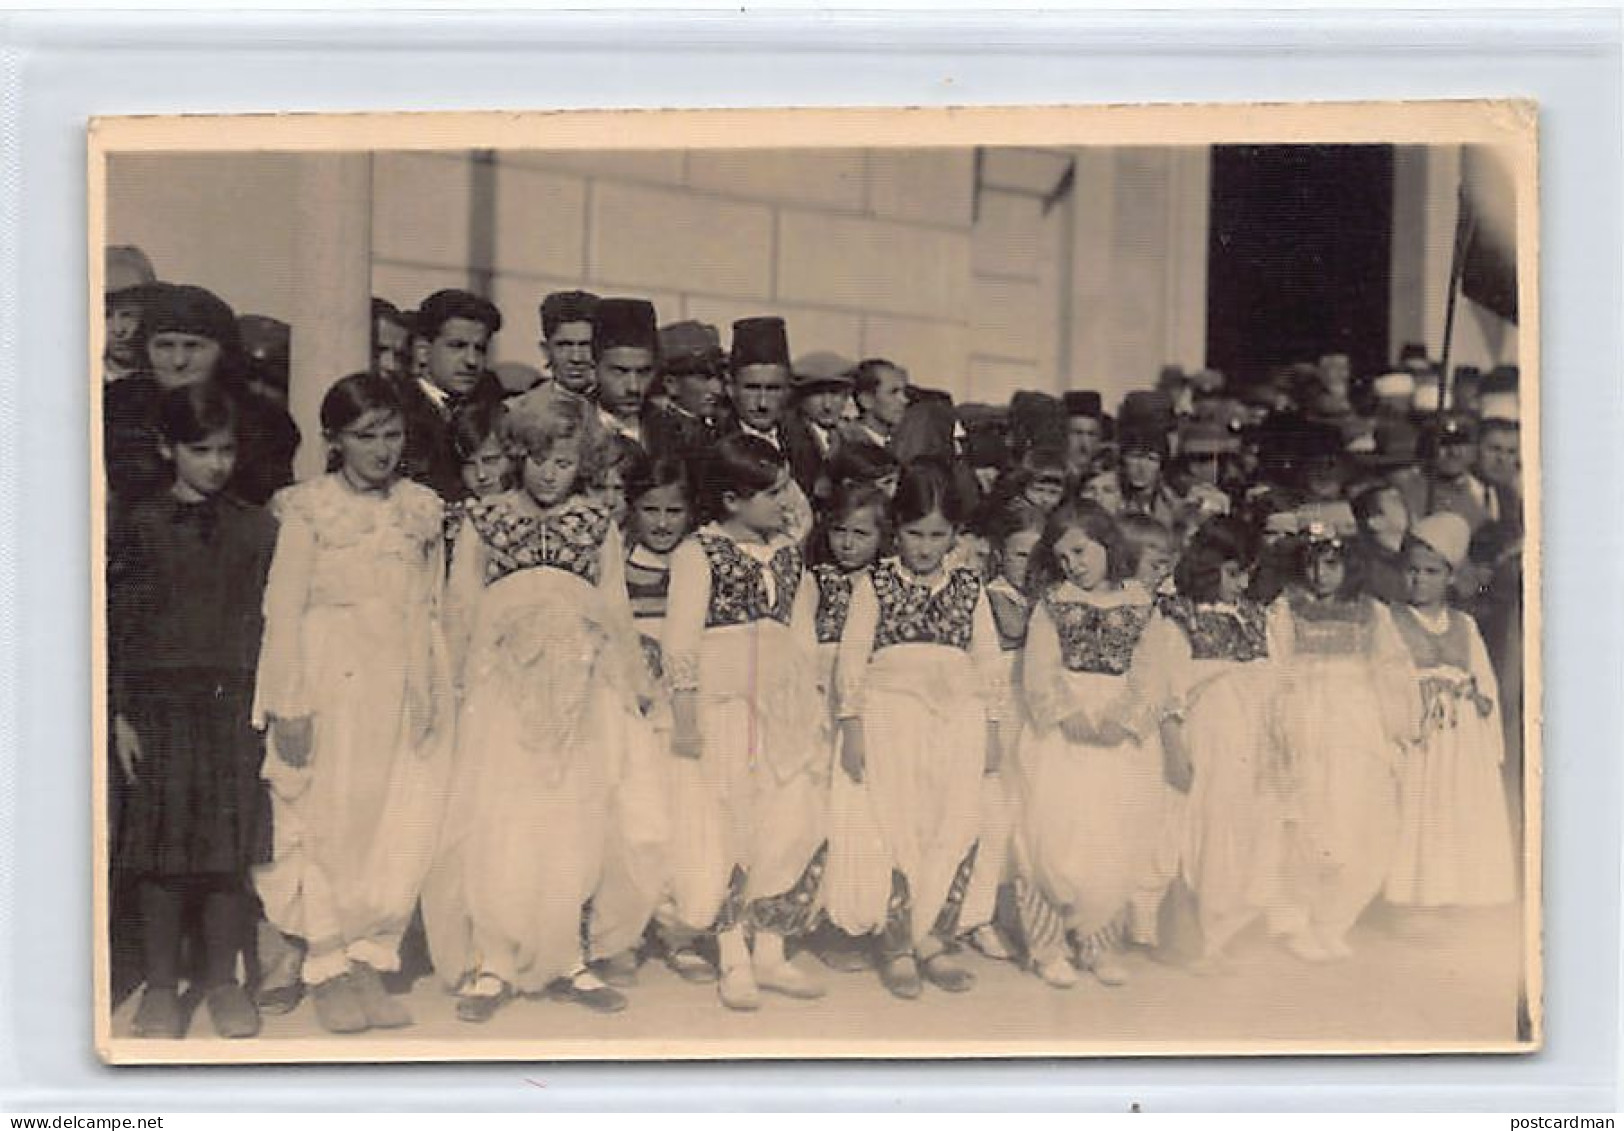 Albania - TIRANA - National Day Parade - Group Of Children In National Costume - REAL PHOTO (circa 1932) - Publ. Agence  - Albanien